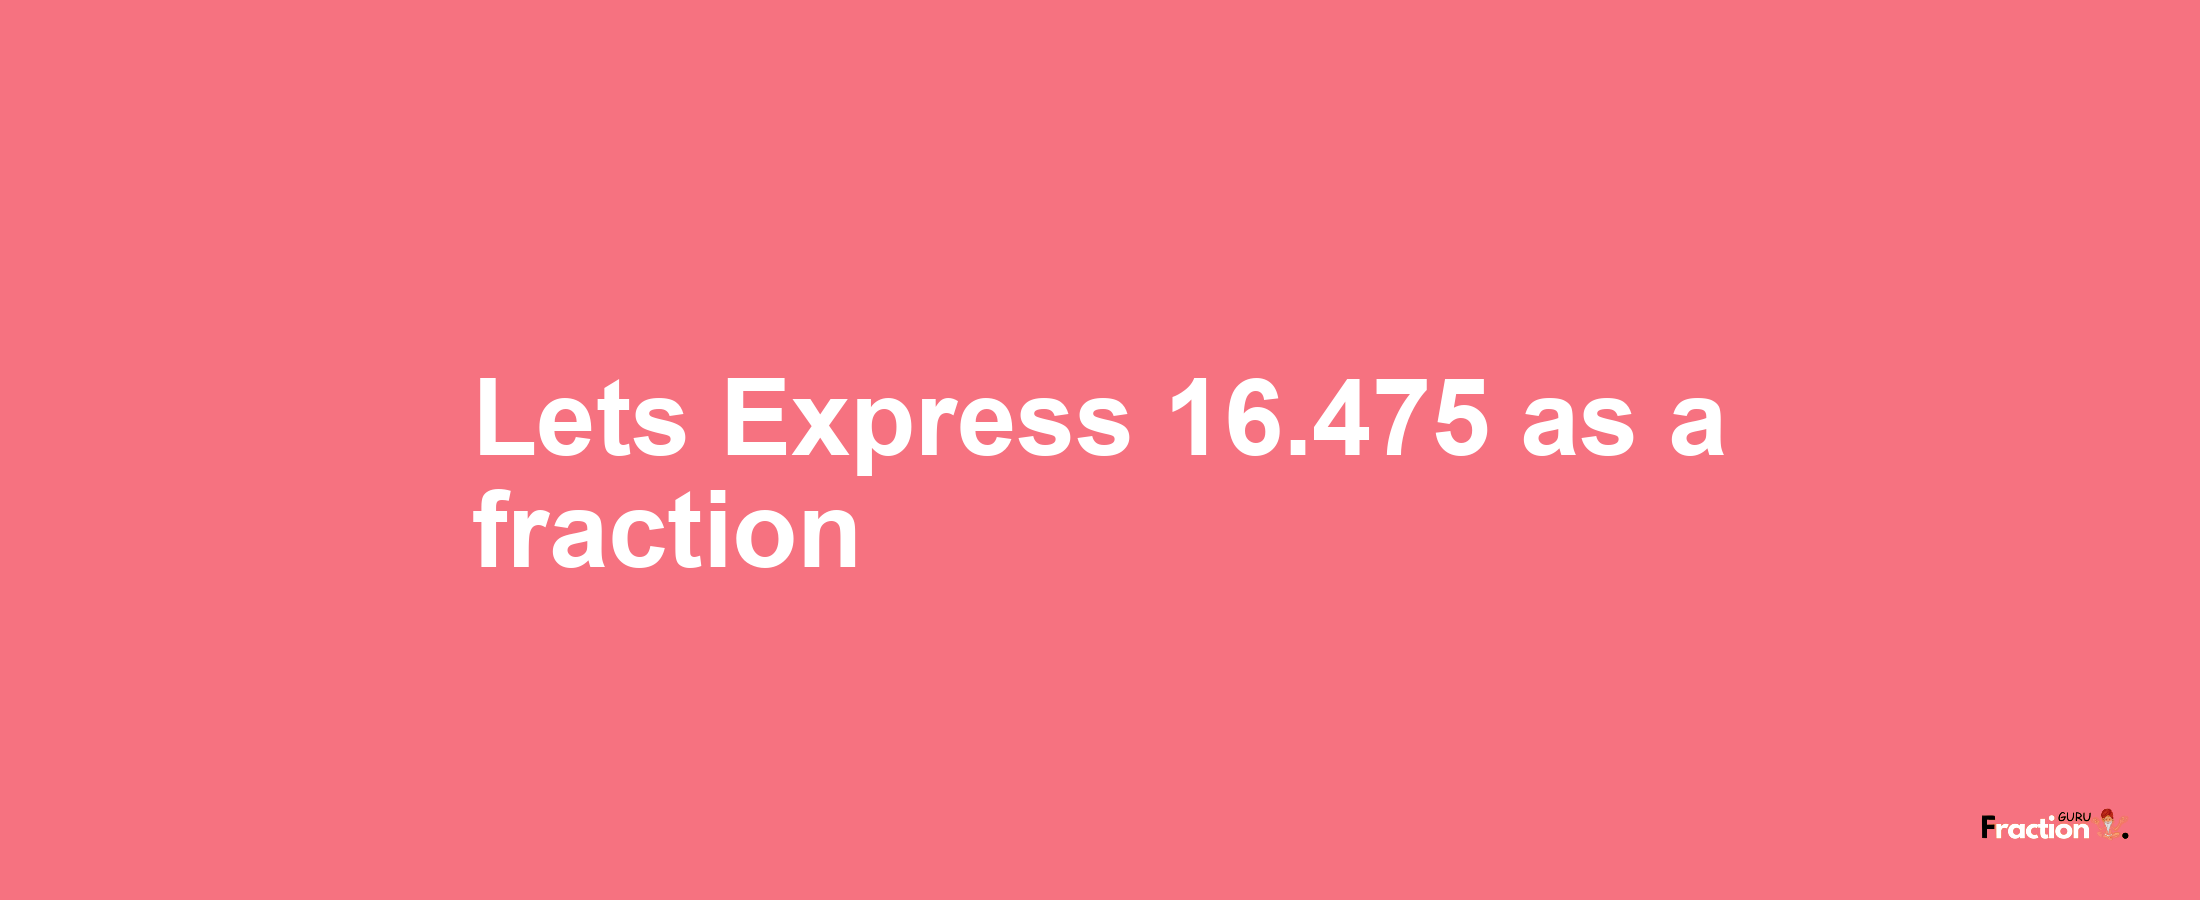 Lets Express 16.475 as afraction